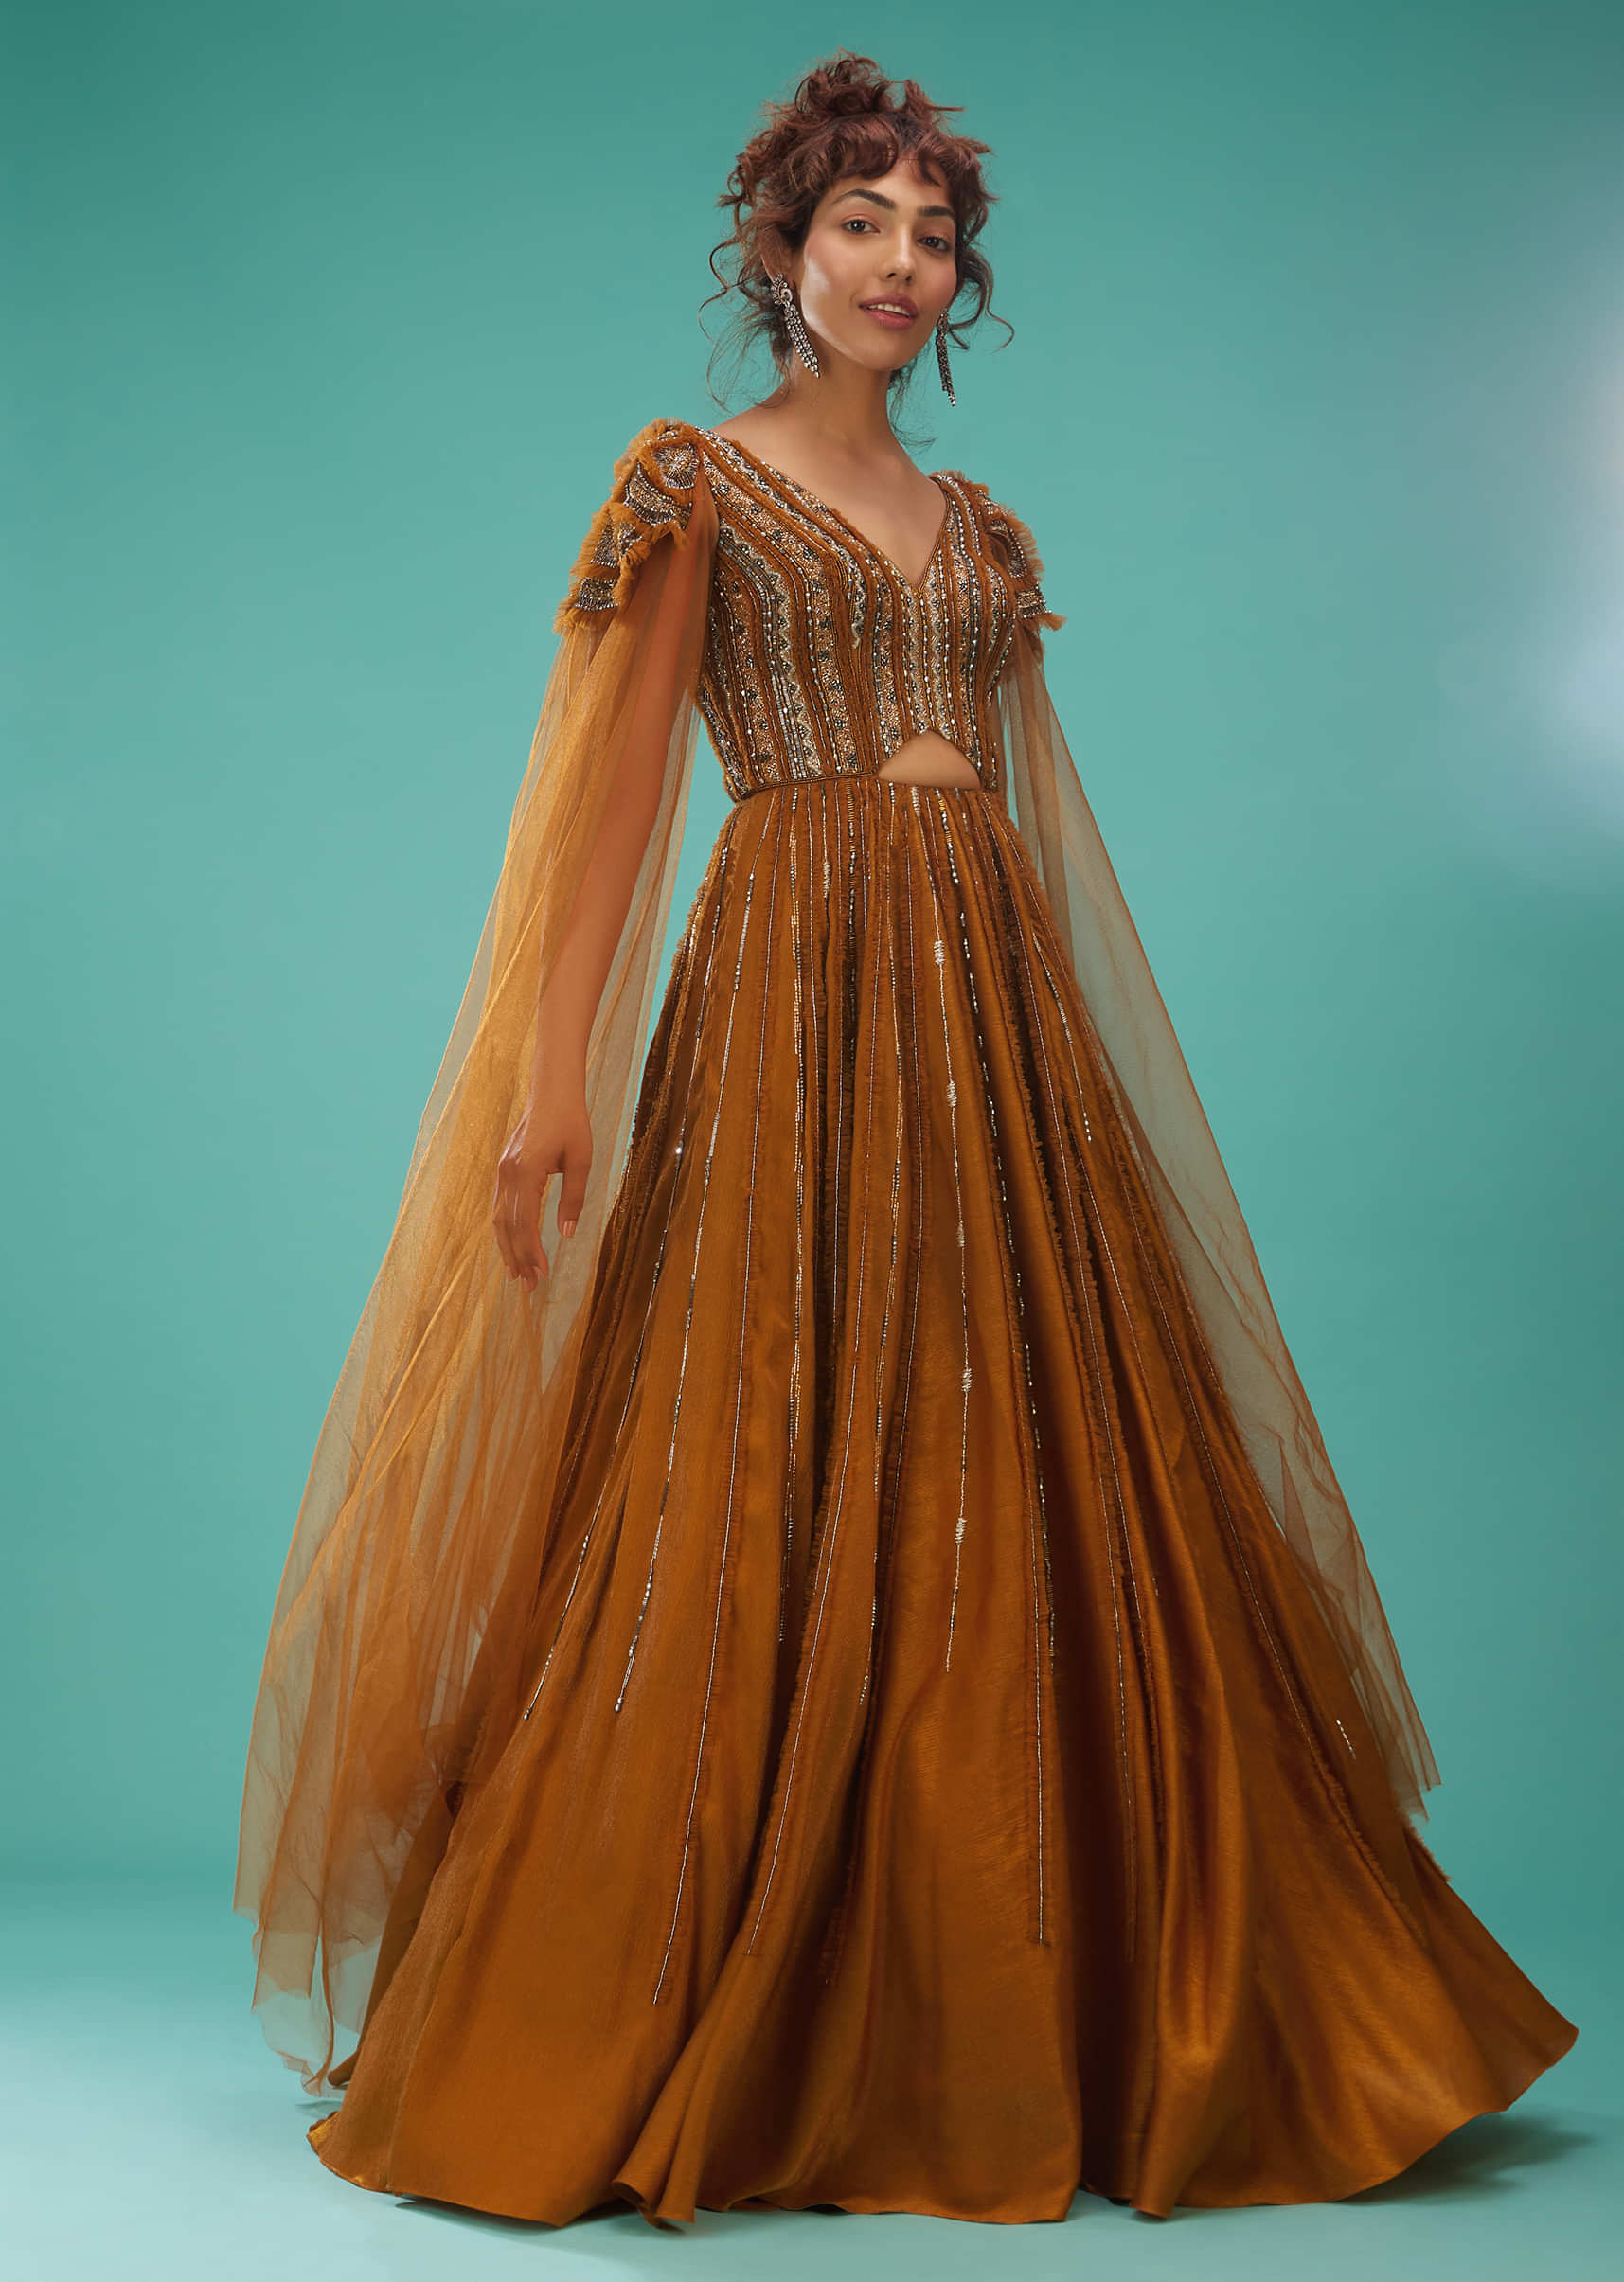 Kalki Golden Oak Yellow Ball Gown With Ruffle Frills And Embroidery